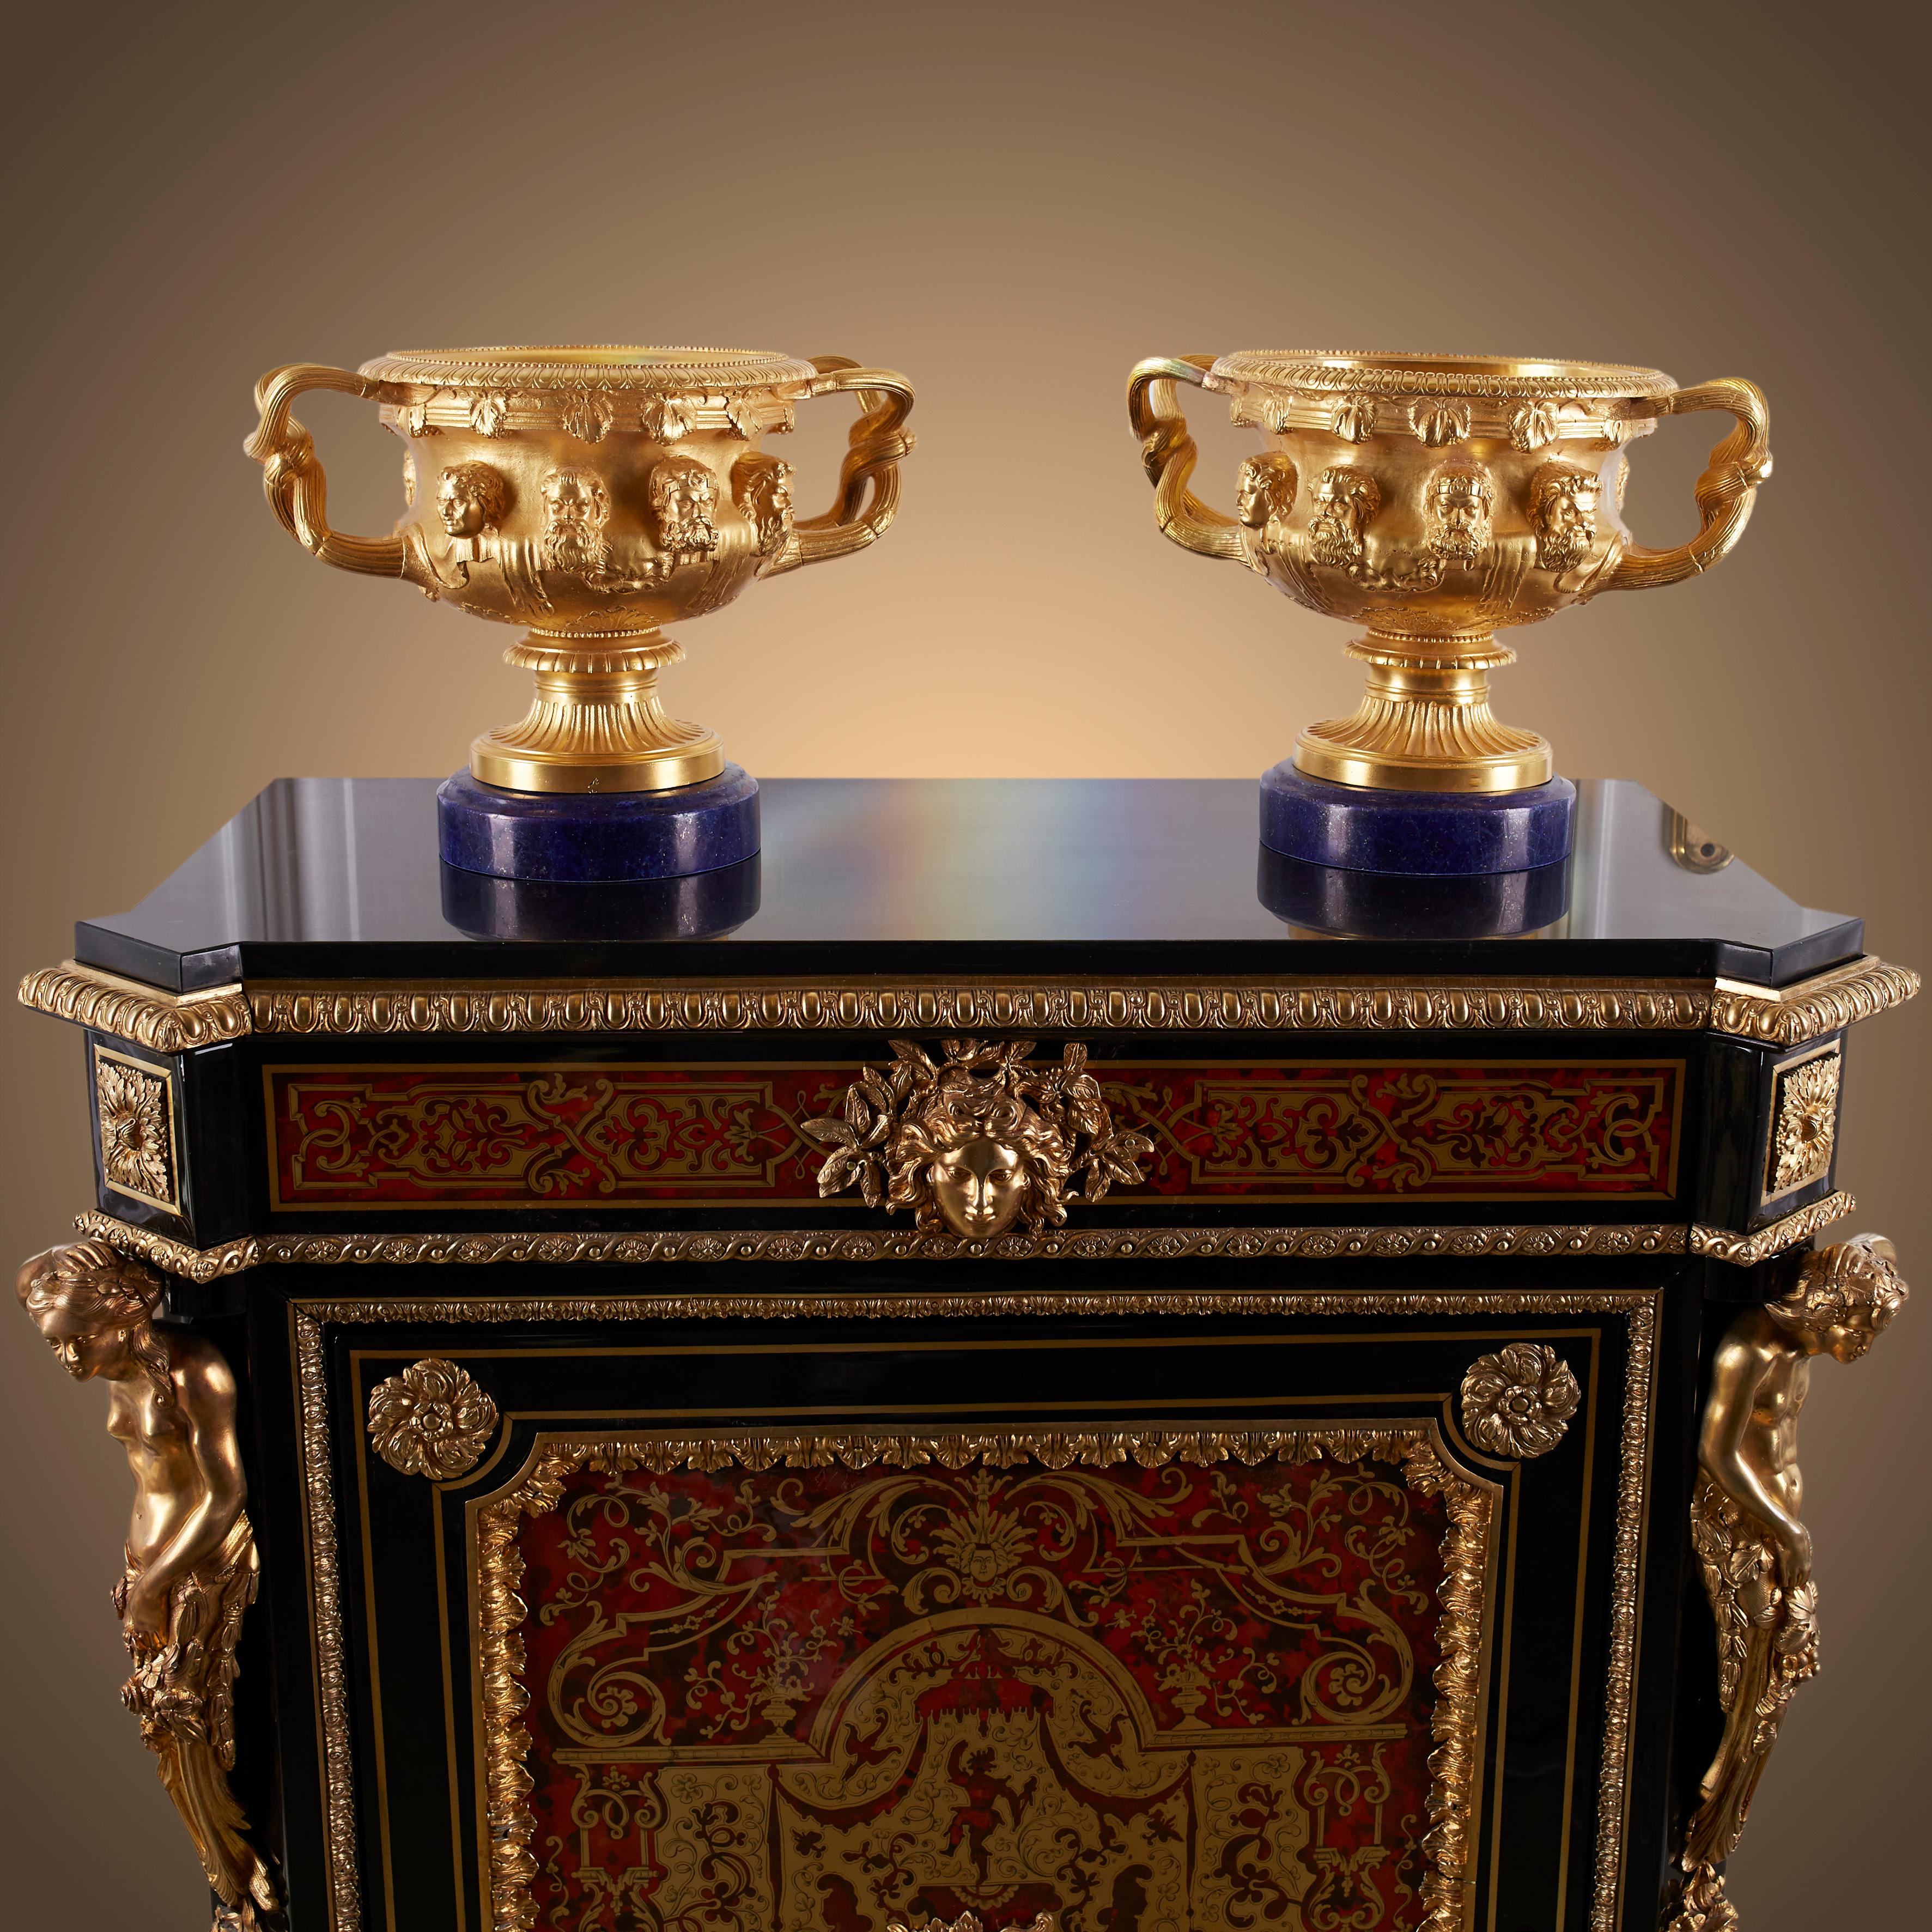 This wooden cabinet is designed in the Boulle style. This style was very popular around the time of Napoleon III. The characteristic of this style is the use of small pieces of wood in furniture, inlaid designs with many different materials: